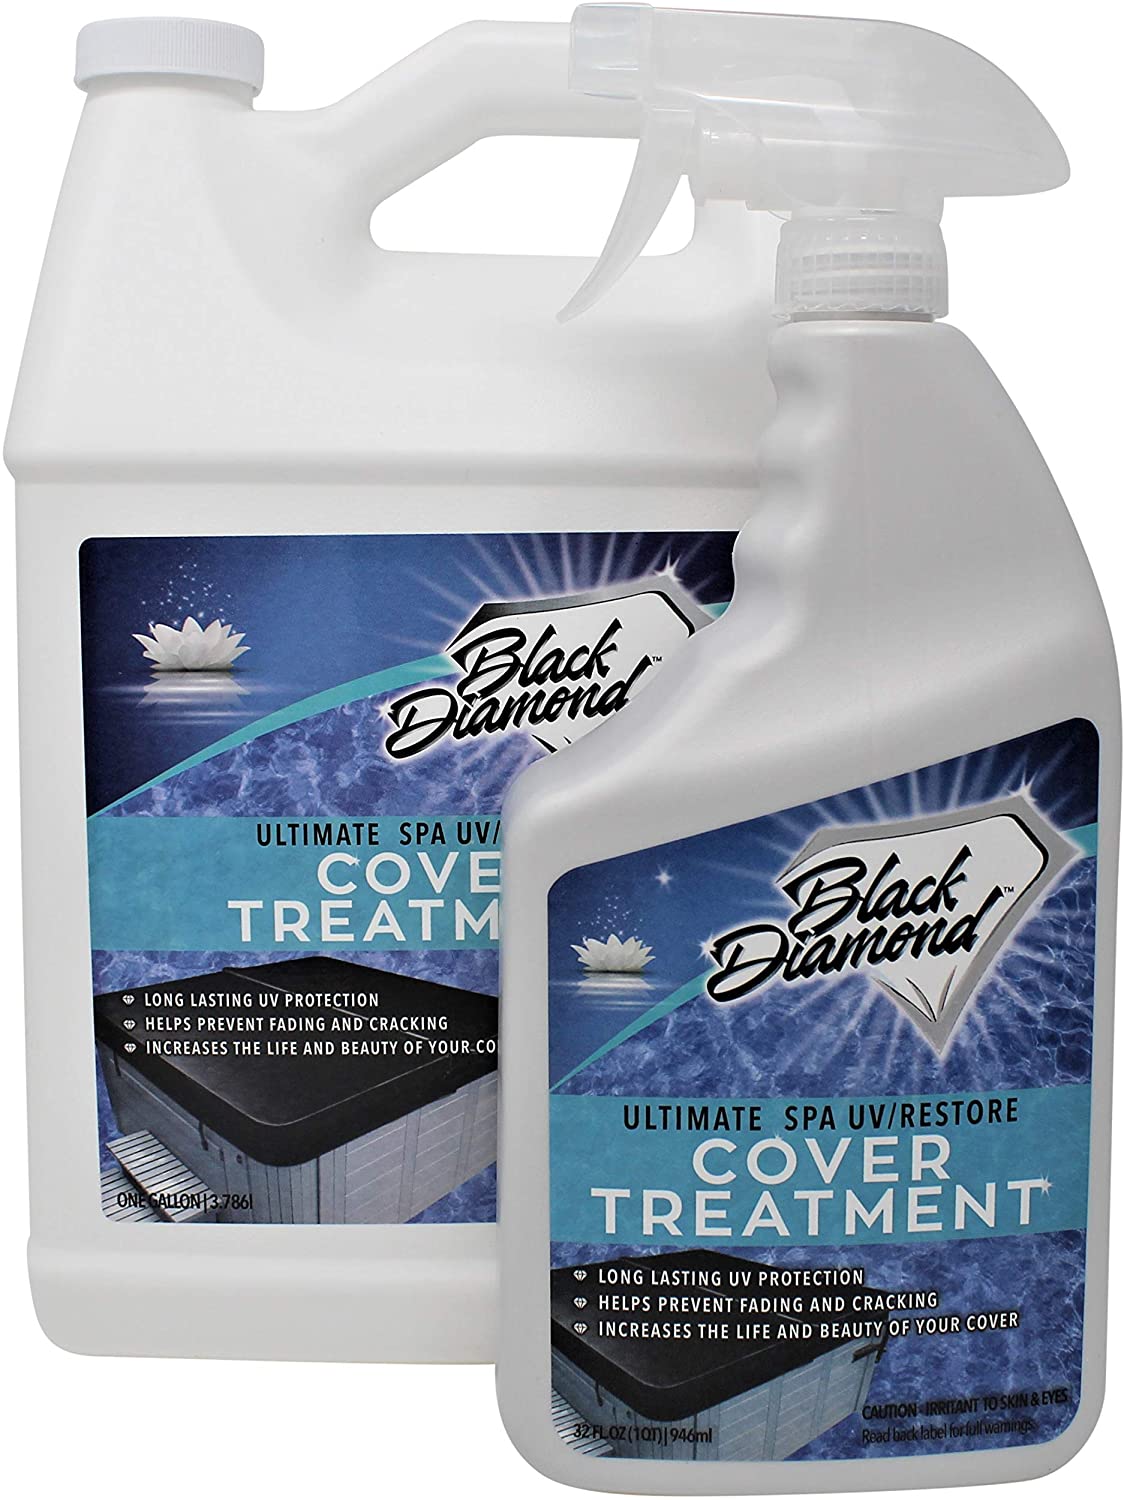 Ultimate Spa Hot Tub UV/Restore Cover Treatment, Protectant, Conditioner for Vinyl and Plastic.